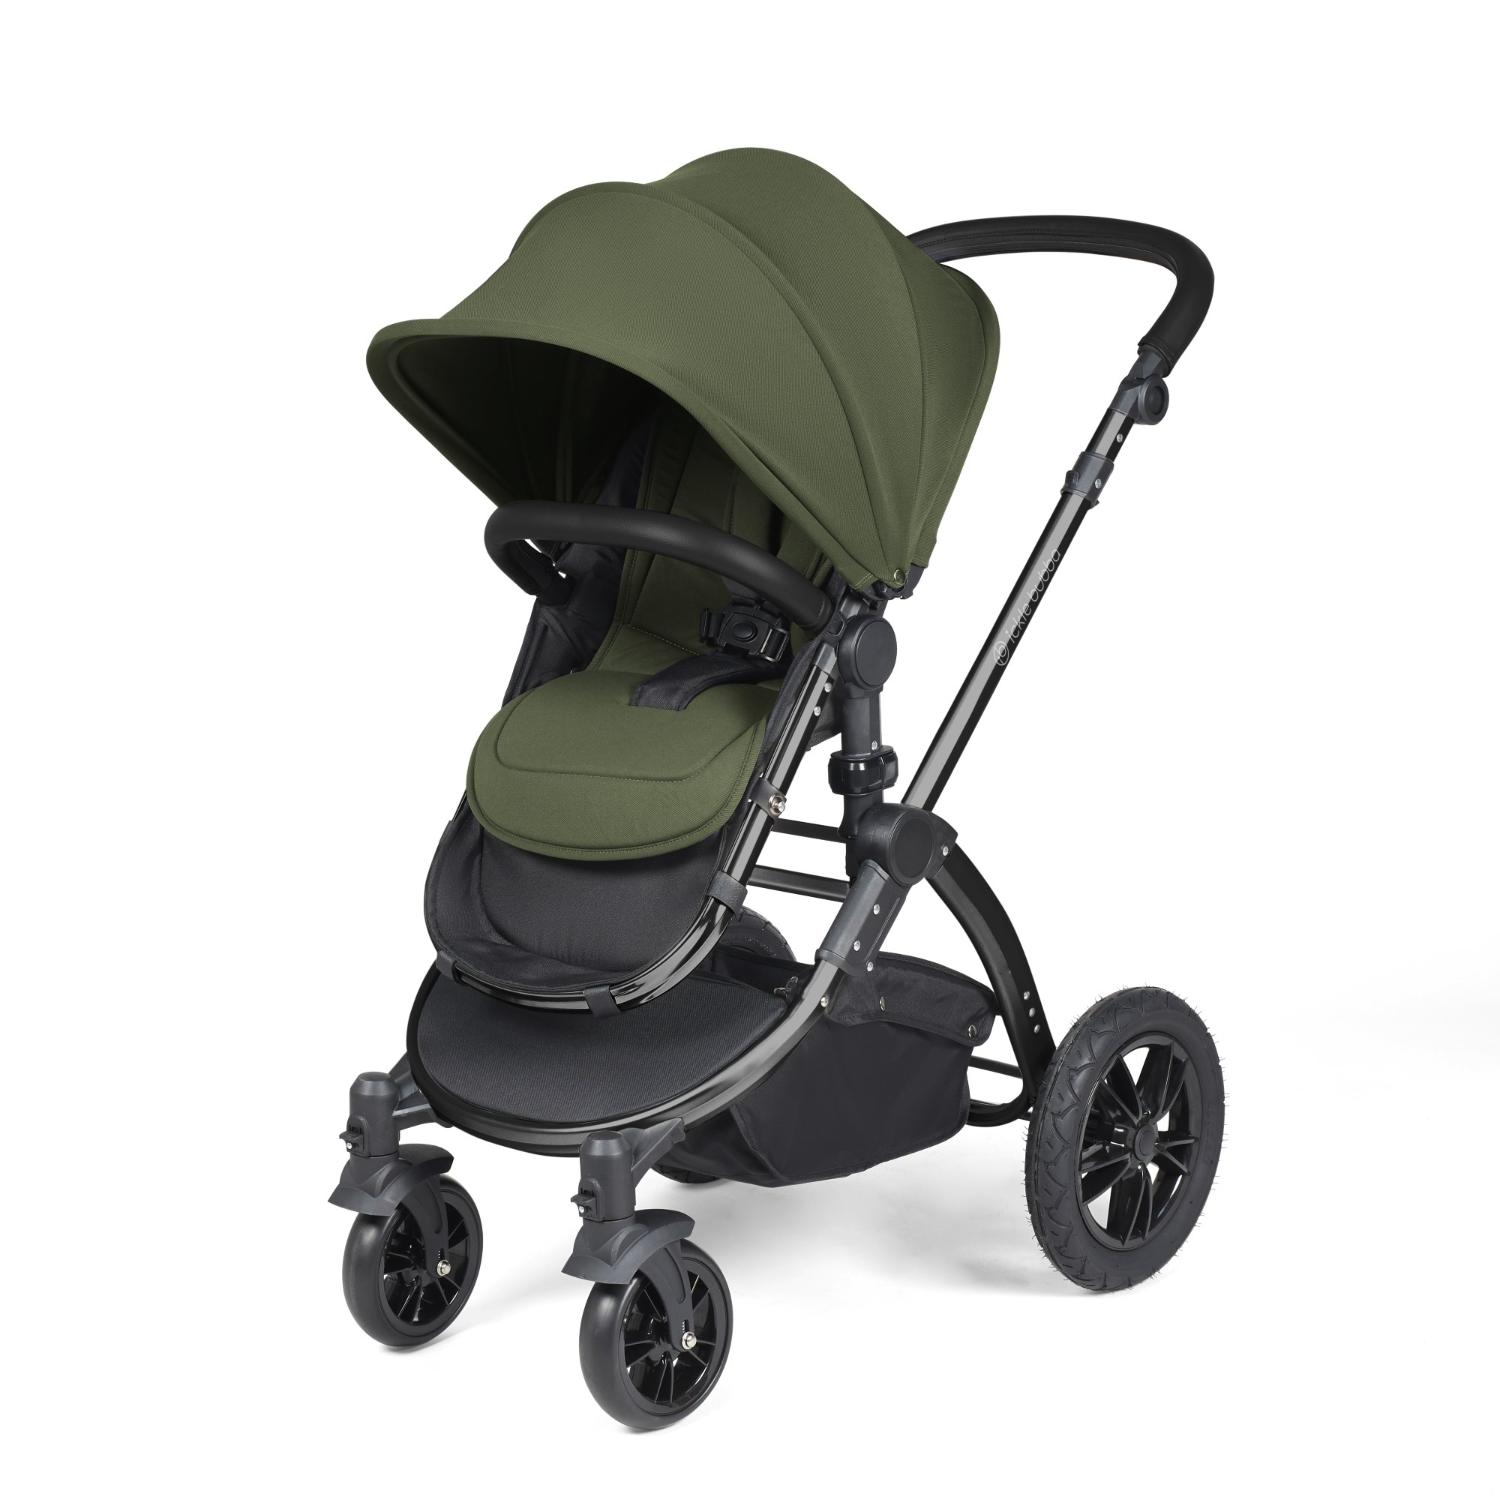 Ickle Bubba Stomp Luxe Pushchair with seat unit attached in Woodland green colour